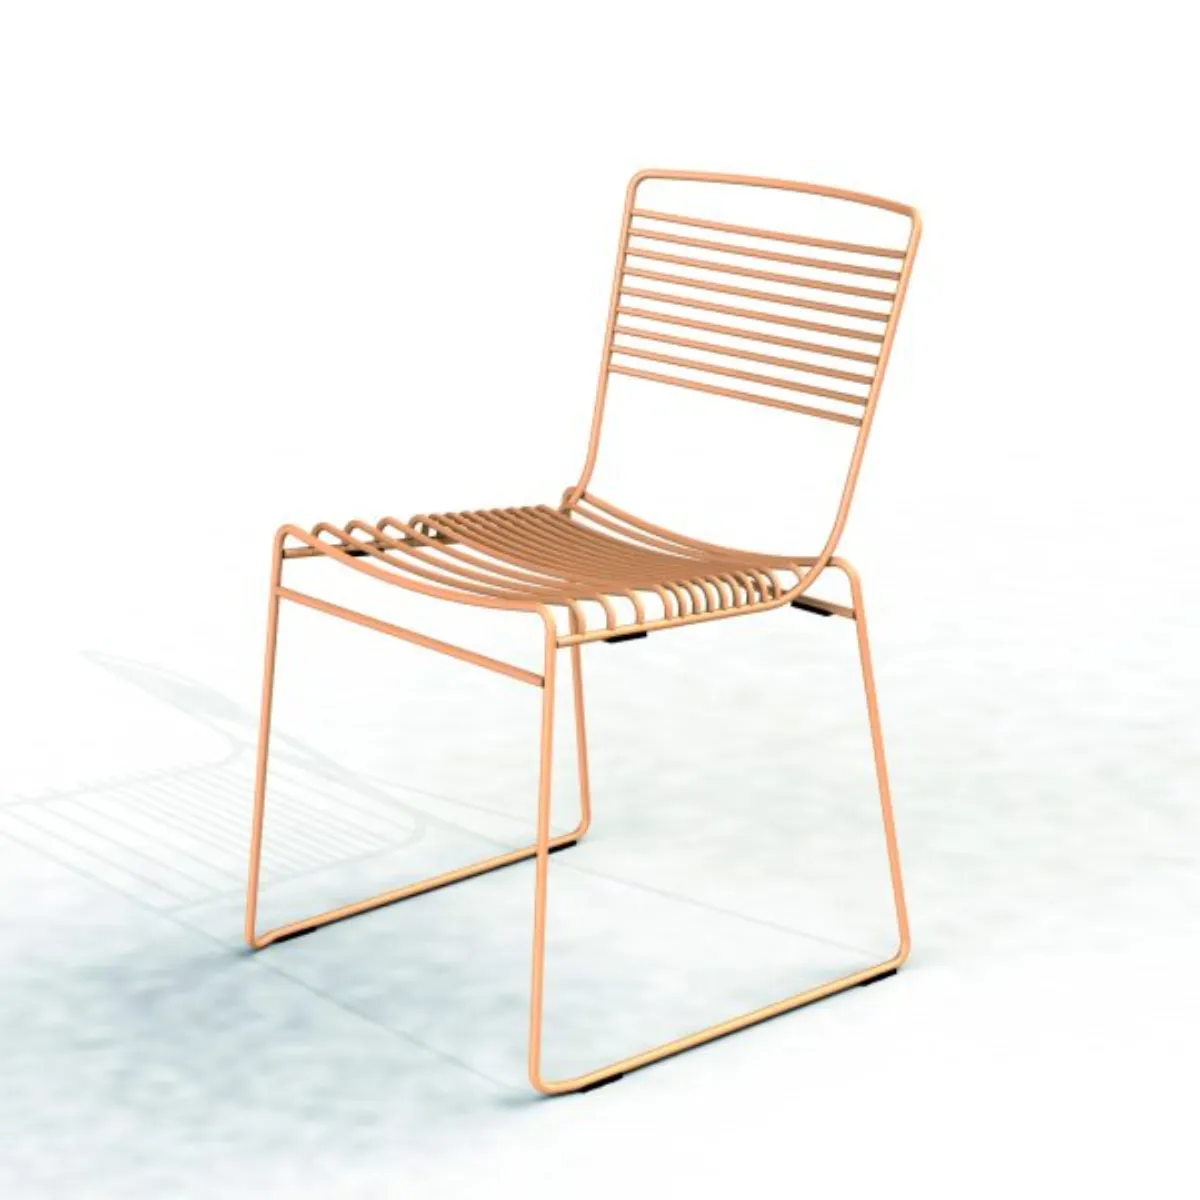 Afonso side chair 2 +